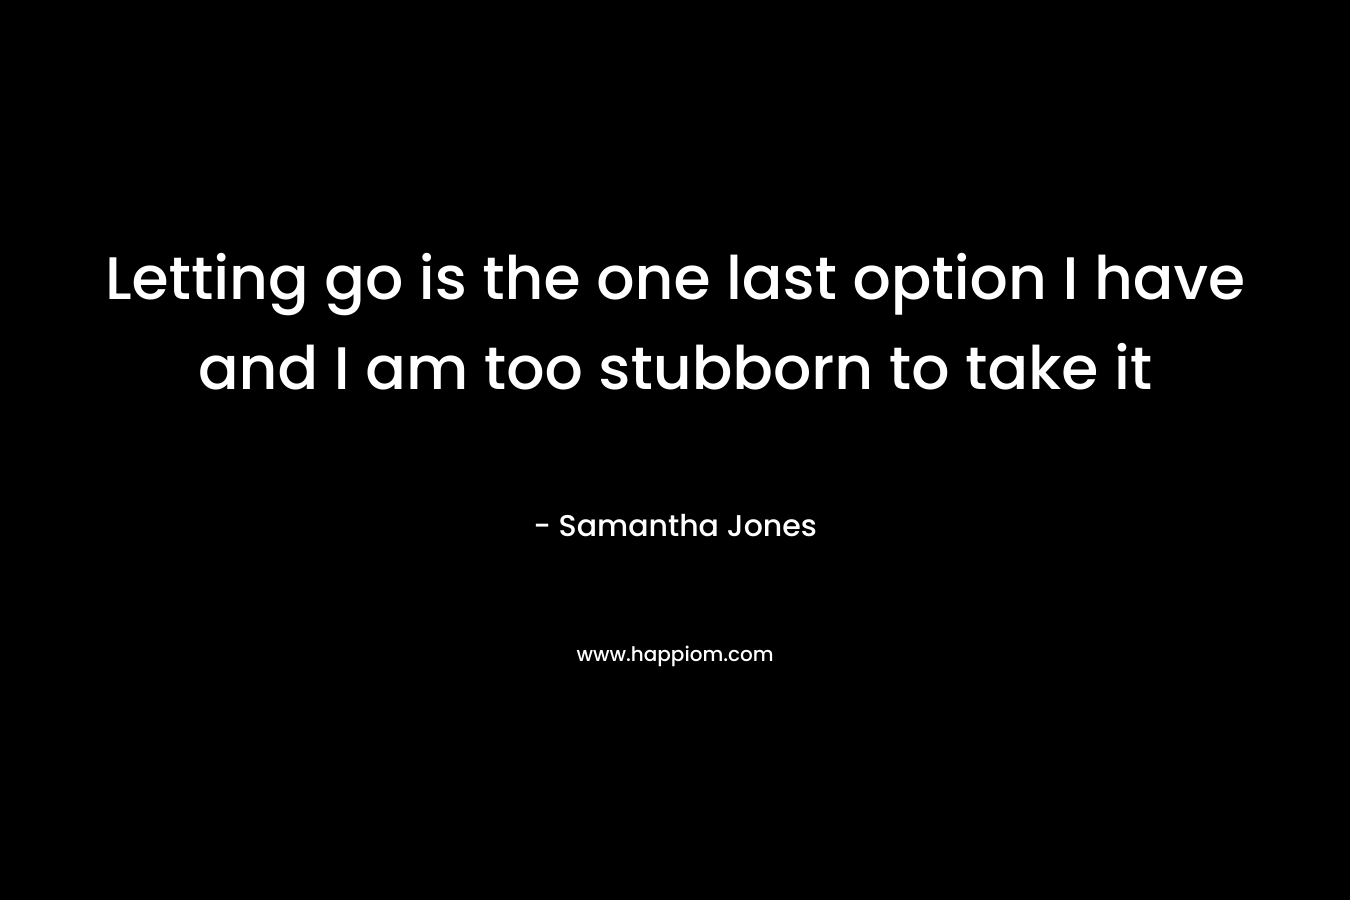 Letting go is the one last option I have and I am too stubborn to take it – Samantha Jones